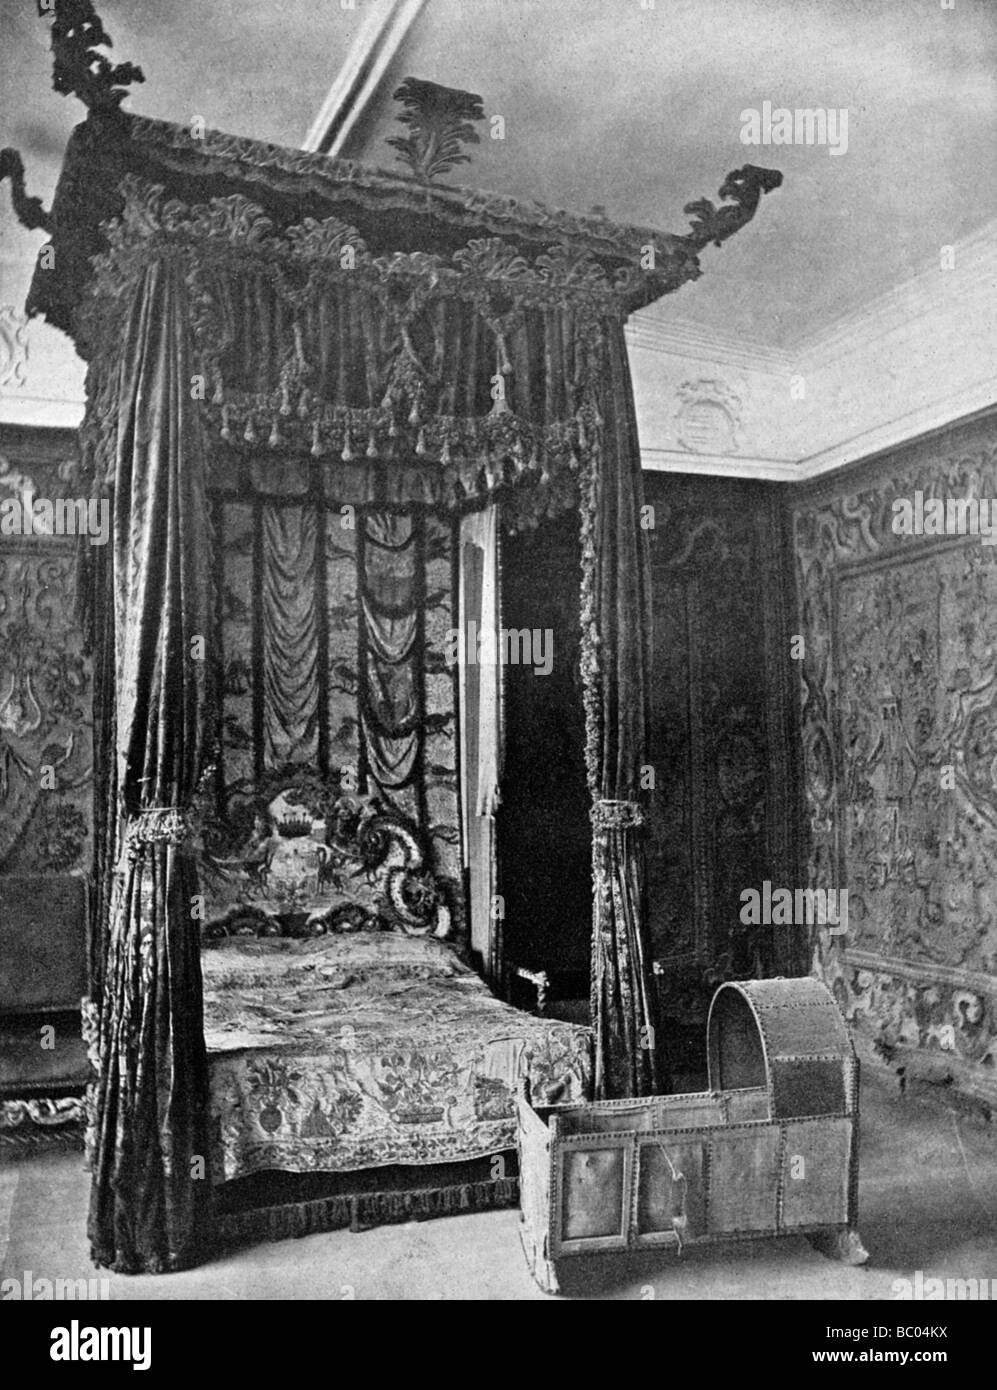 Queen Elizabeths Bedroom High Resolution Stock Photography And Images Alamy